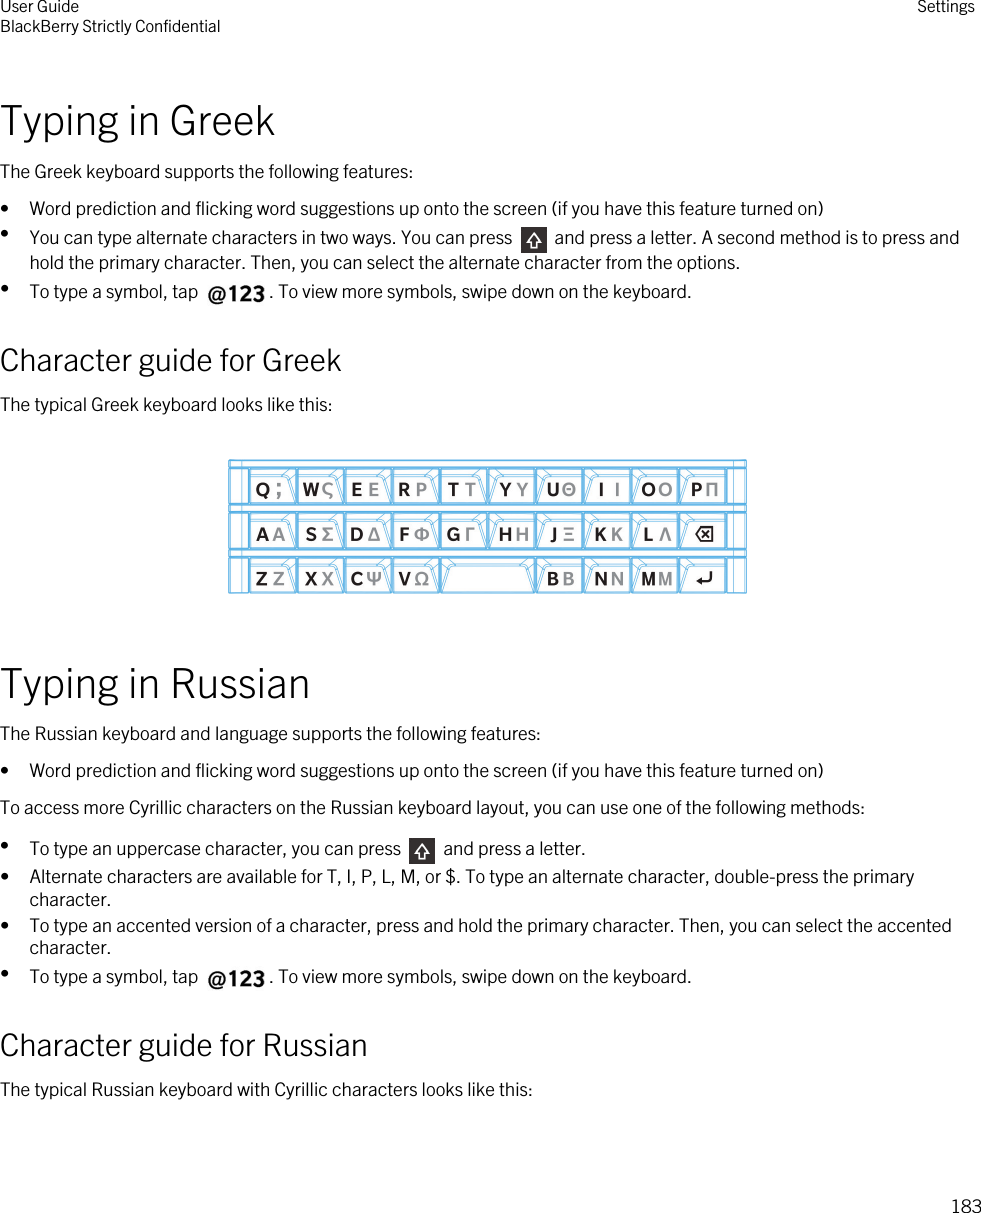 Typing in GreekThe Greek keyboard supports the following features:• Word prediction and flicking word suggestions up onto the screen (if you have this feature turned on)•You can type alternate characters in two ways. You can press   and press a letter. A second method is to press and hold the primary character. Then, you can select the alternate character from the options.•To type a symbol, tap  . To view more symbols, swipe down on the keyboard.Character guide for GreekThe typical Greek keyboard looks like this:  Typing in RussianThe Russian keyboard and language supports the following features:• Word prediction and flicking word suggestions up onto the screen (if you have this feature turned on)To access more Cyrillic characters on the Russian keyboard layout, you can use one of the following methods:•To type an uppercase character, you can press   and press a letter.• Alternate characters are available for T, I, P, L, M, or $. To type an alternate character, double-press the primary character.• To type an accented version of a character, press and hold the primary character. Then, you can select the accented character.•To type a symbol, tap  . To view more symbols, swipe down on the keyboard.Character guide for RussianThe typical Russian keyboard with Cyrillic characters looks like this: User GuideBlackBerry Strictly Confidential Settings183